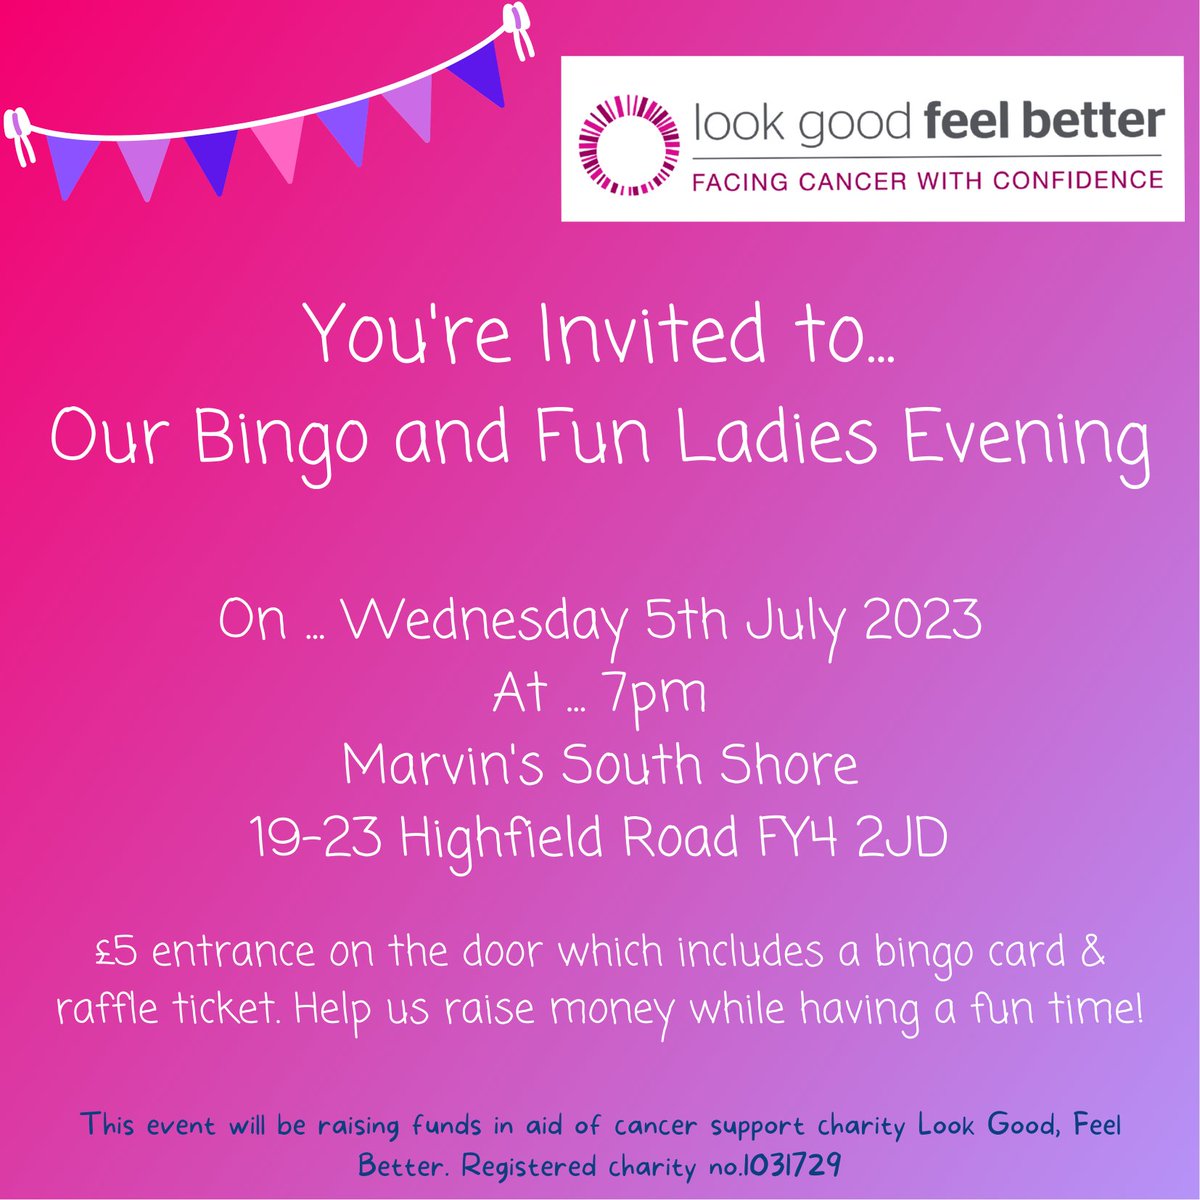 On Wednesday 5th July at 7pm ... Look Good, Feel Better are holding a charity fundraising evening at Marvin's South Shore. They would love to invite you for a night of bingo and fun 💚